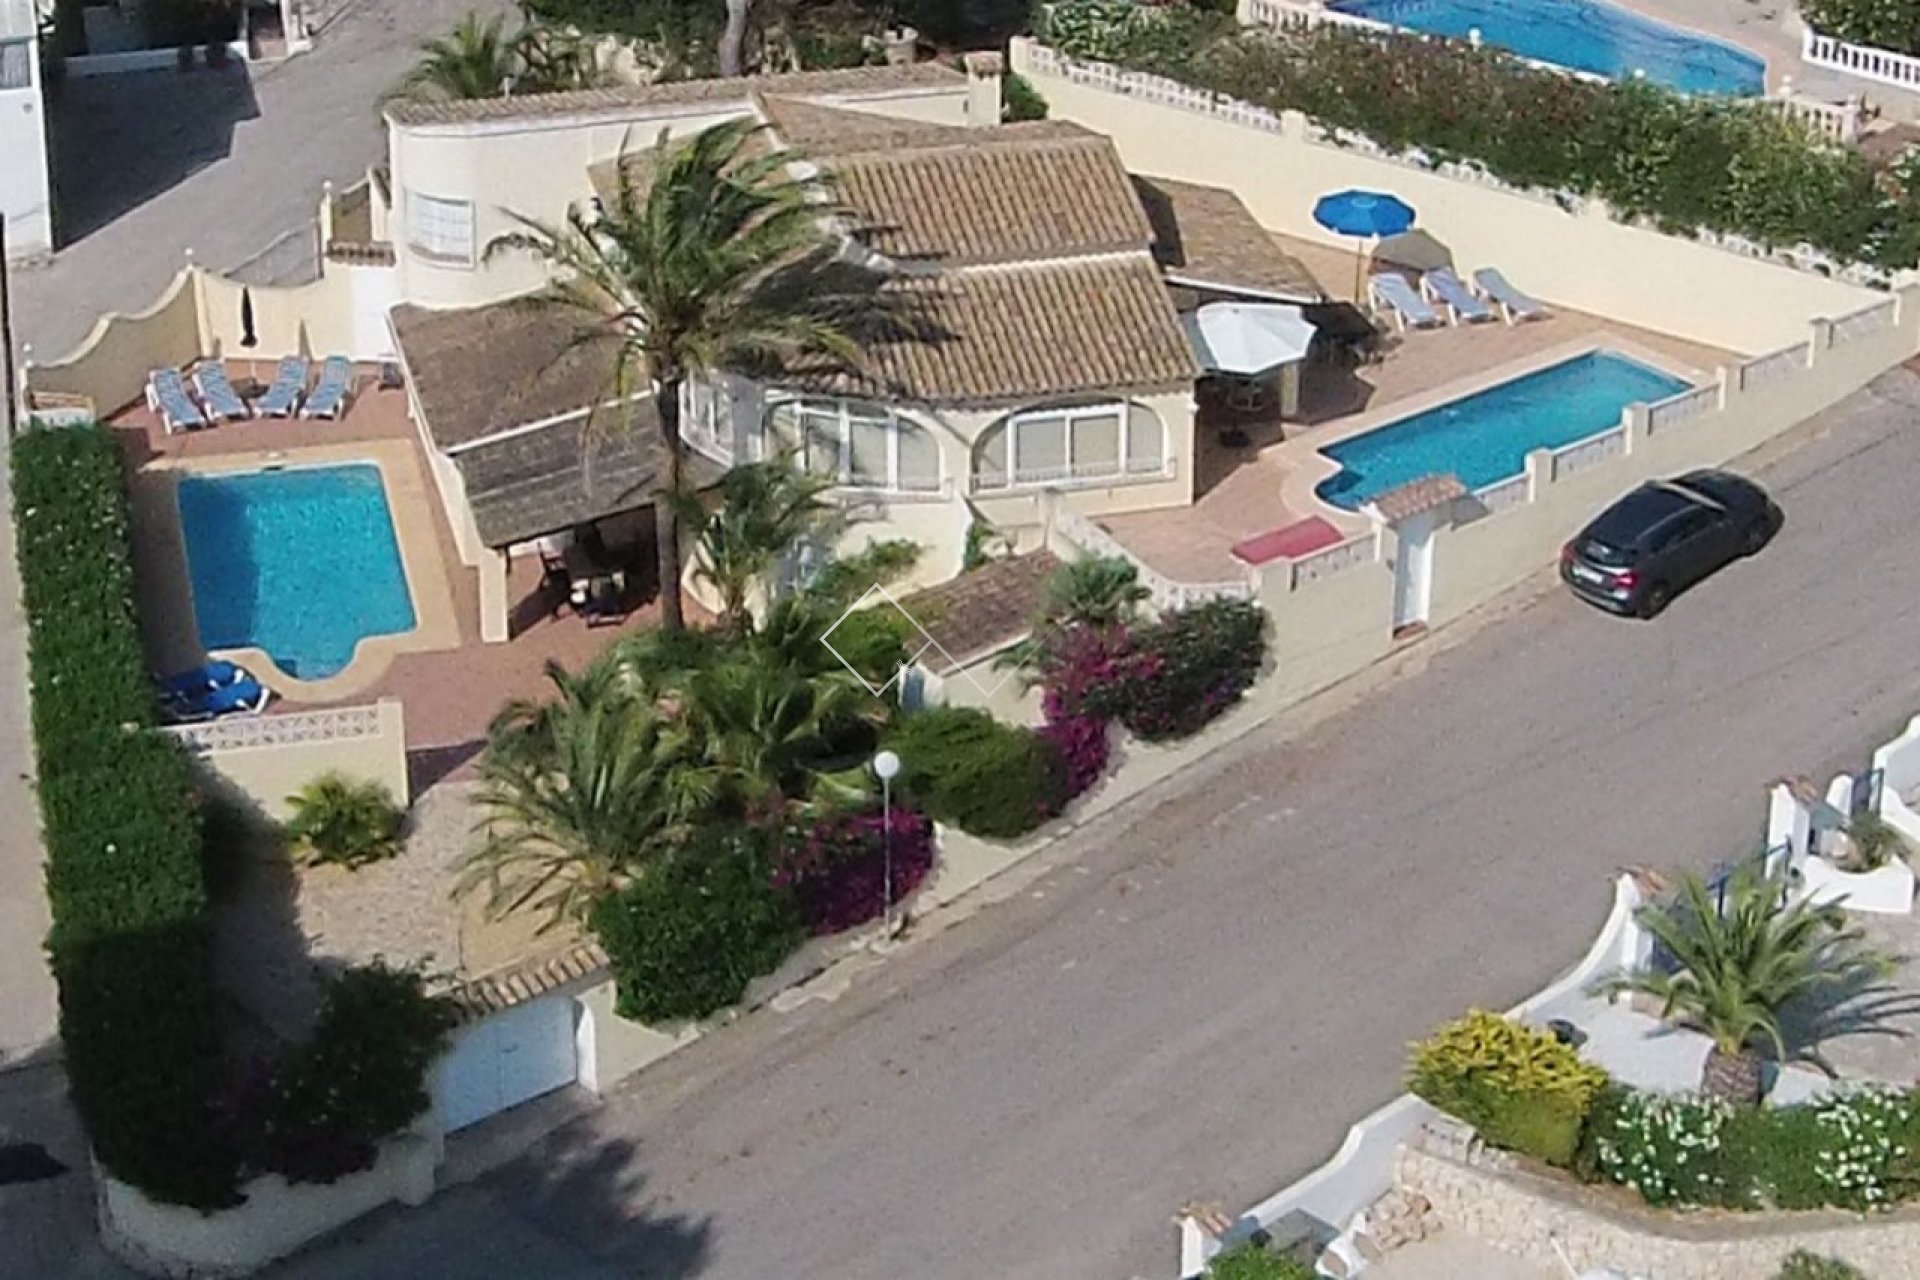 great rental potential - Villa with 2 pools for sale in Villotel, Moraira